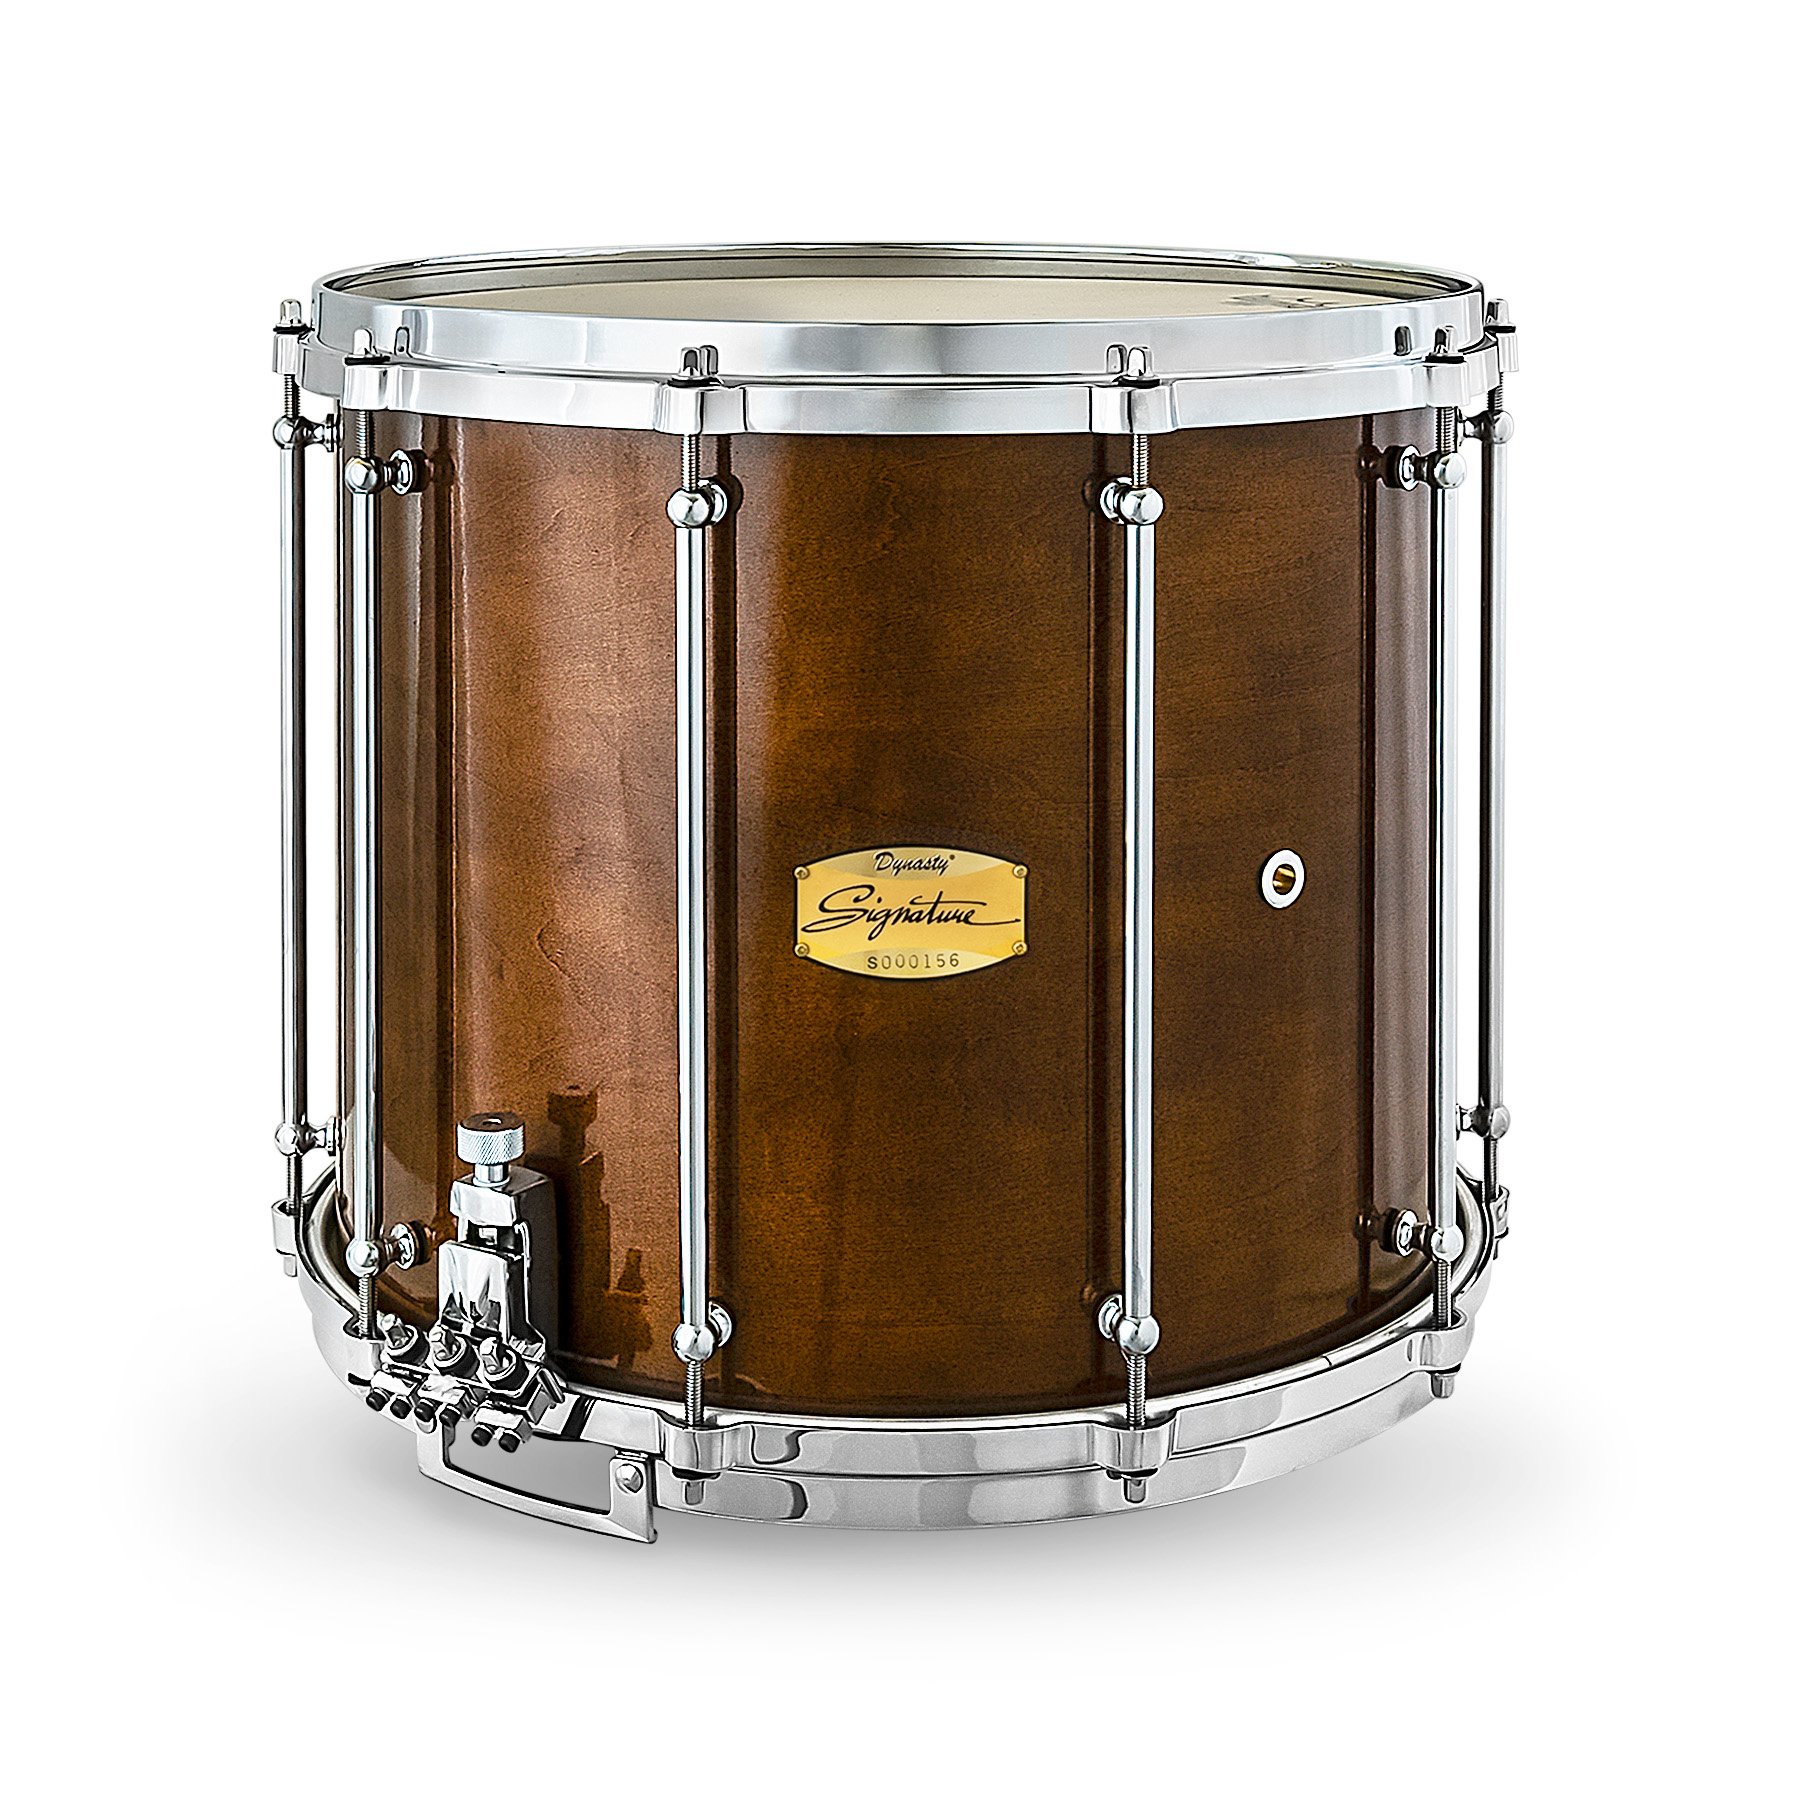 FS-S14 Dynasty Signature Professional Series Field Drum Cherry_Front Shadow.jpg